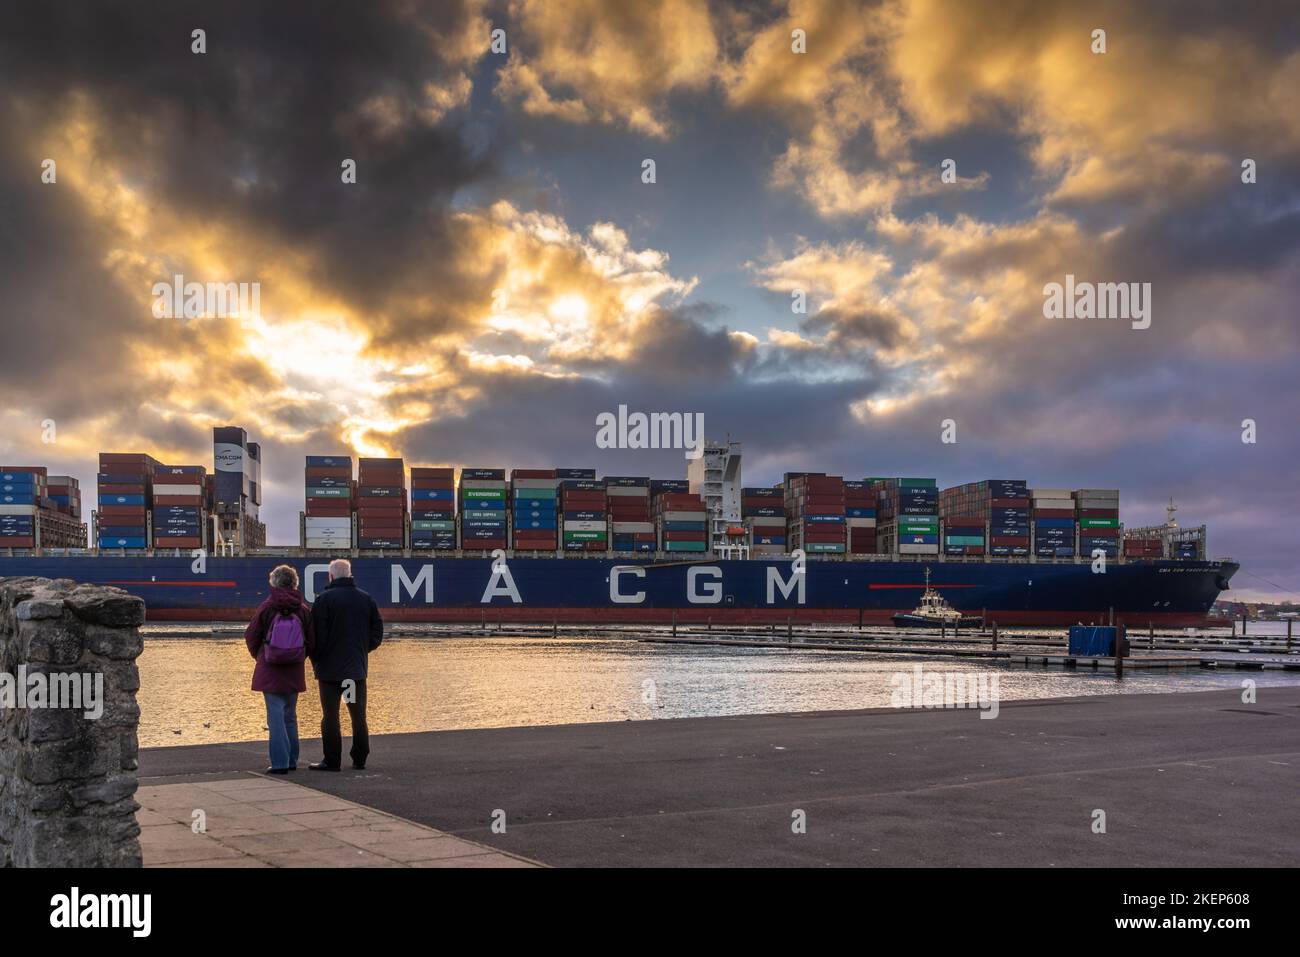 A CMA CGM container ship arrives at the port of Southampton as seen from Mayflower Park, Southampton, Hampshire, England, UK Stock Photo